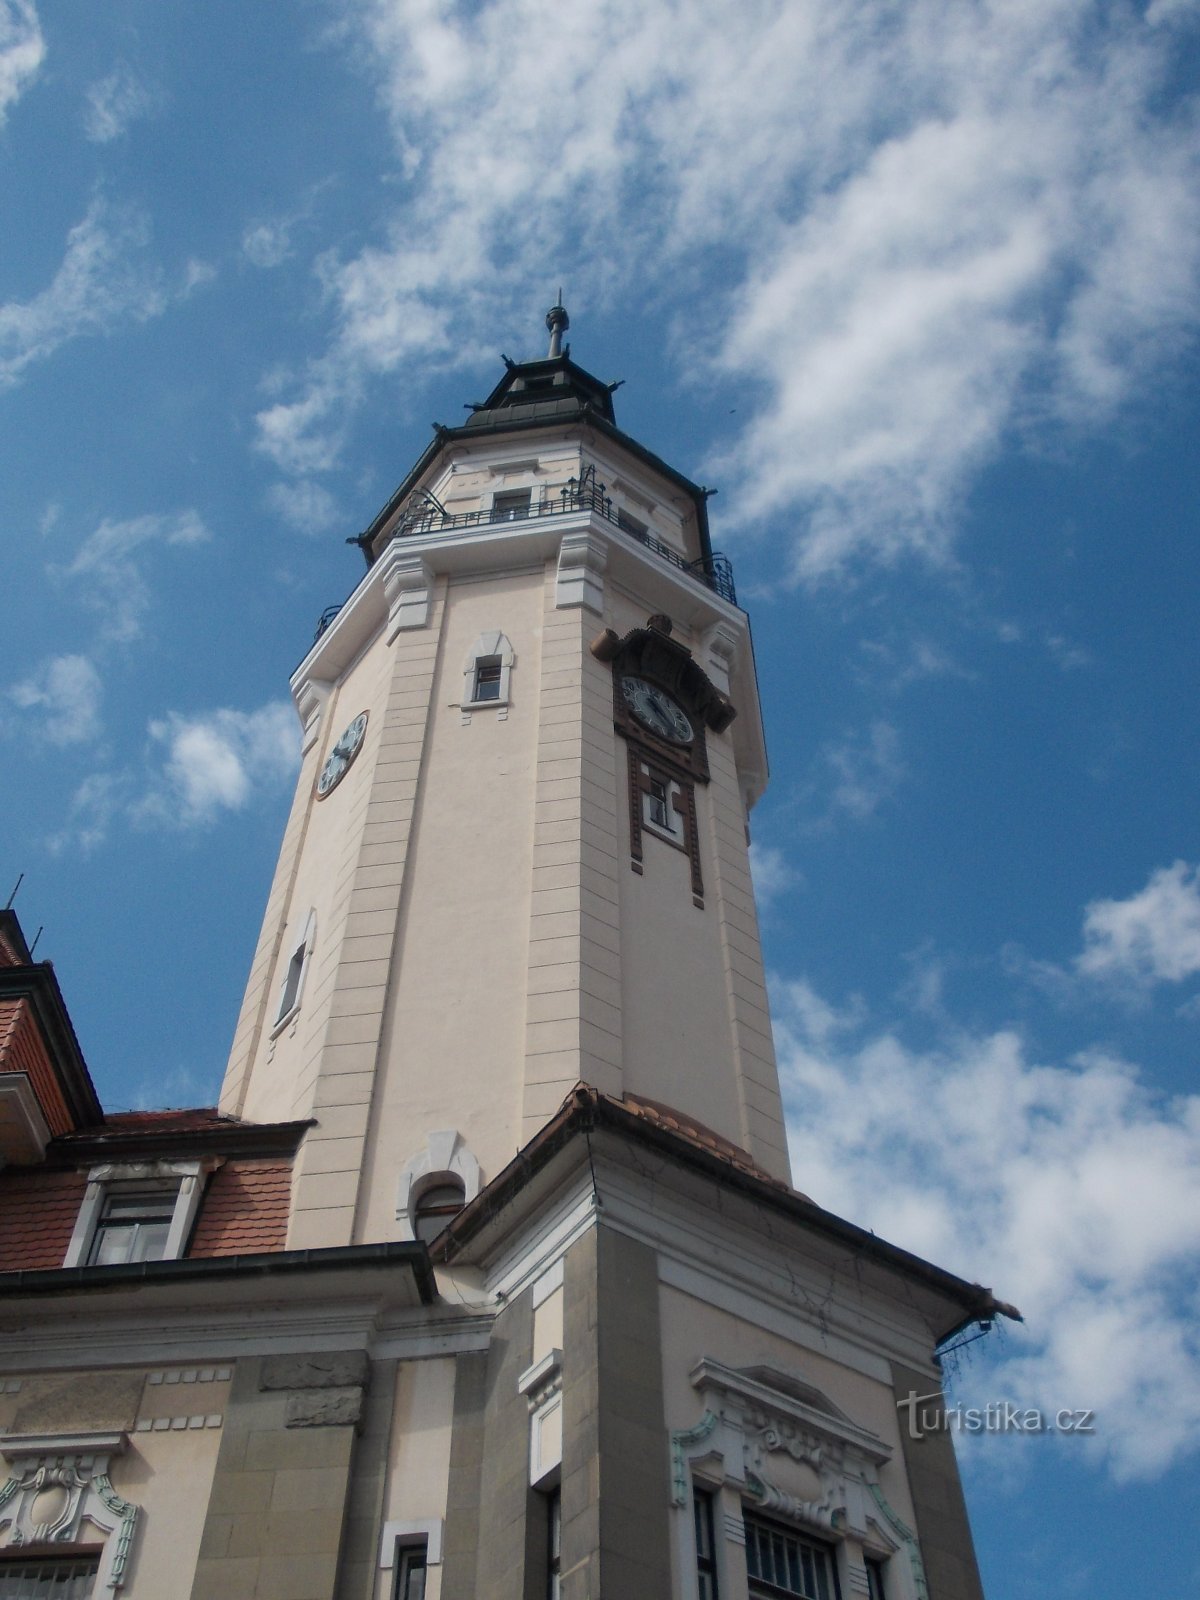 the tower of the town hall is 63 meters high